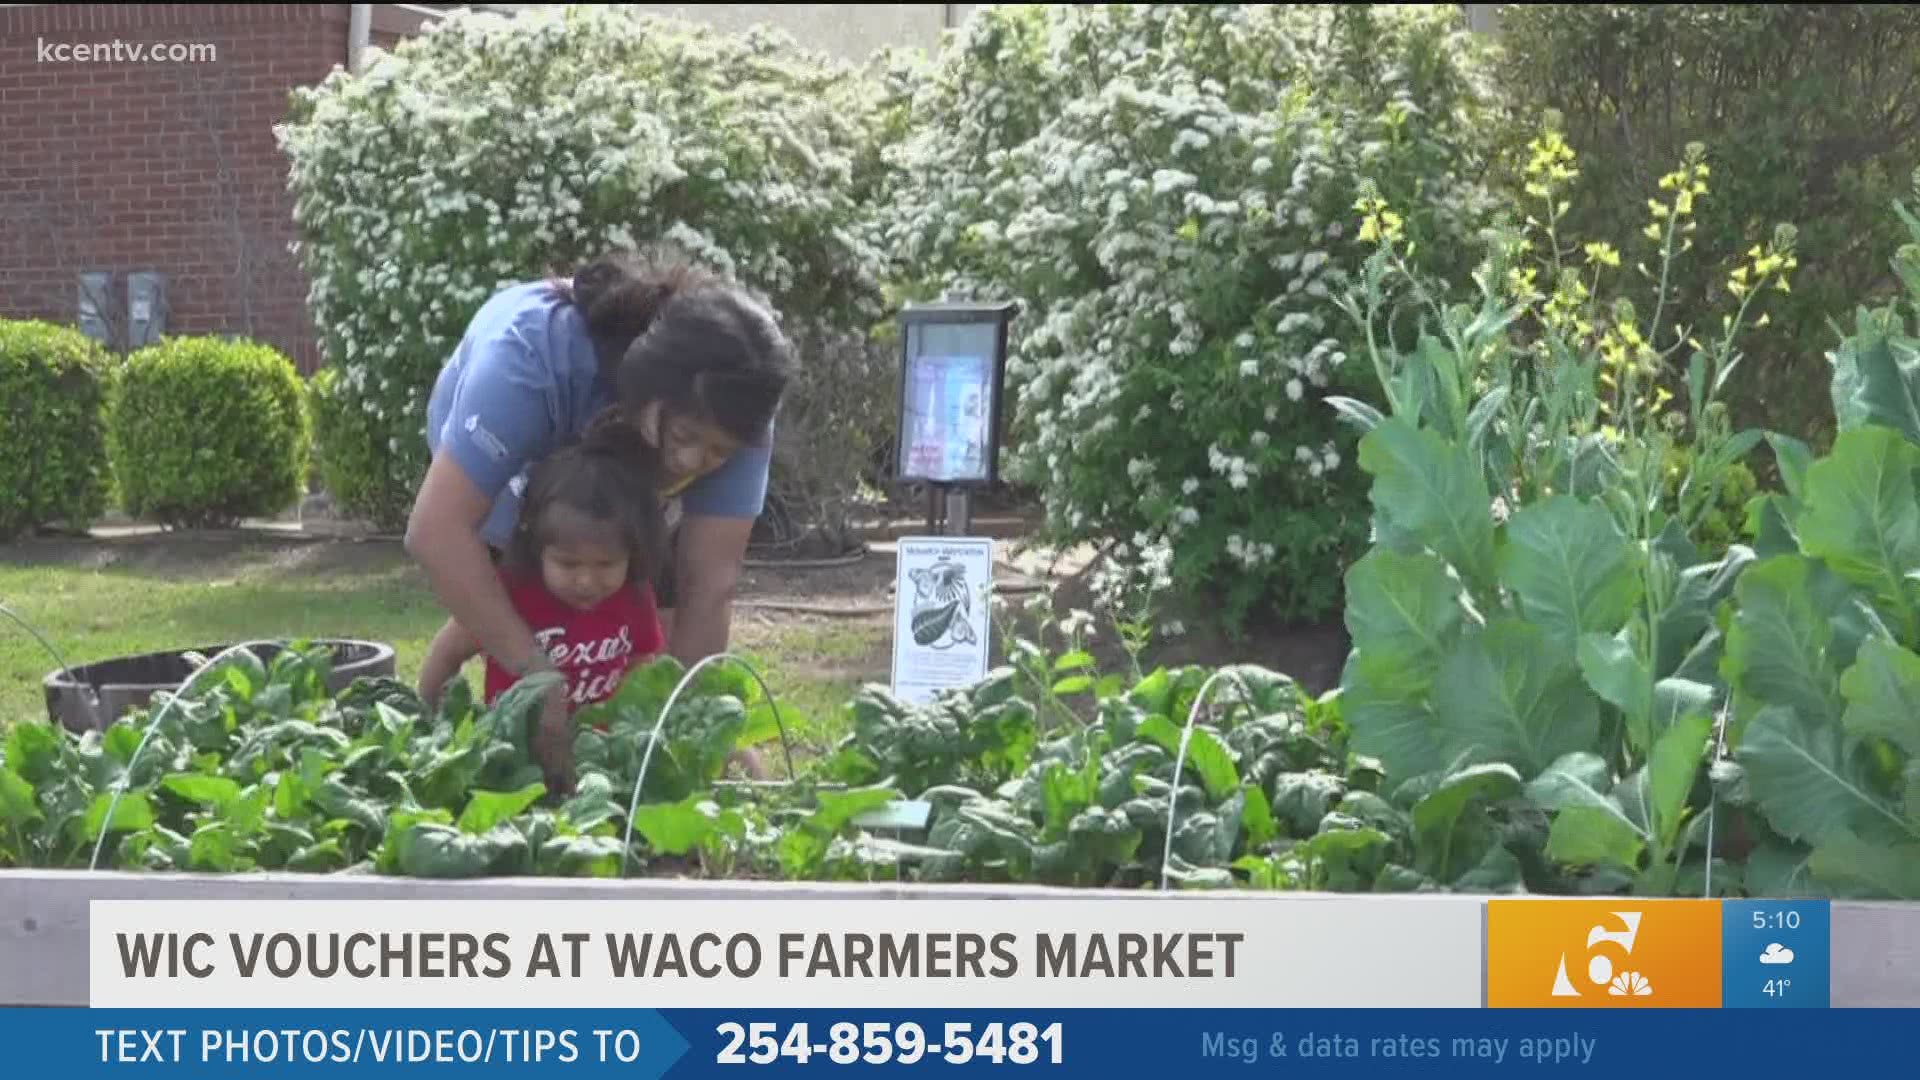 Waco's downtown Farmers Market will offer vouchers to families who participate in the WIC program.